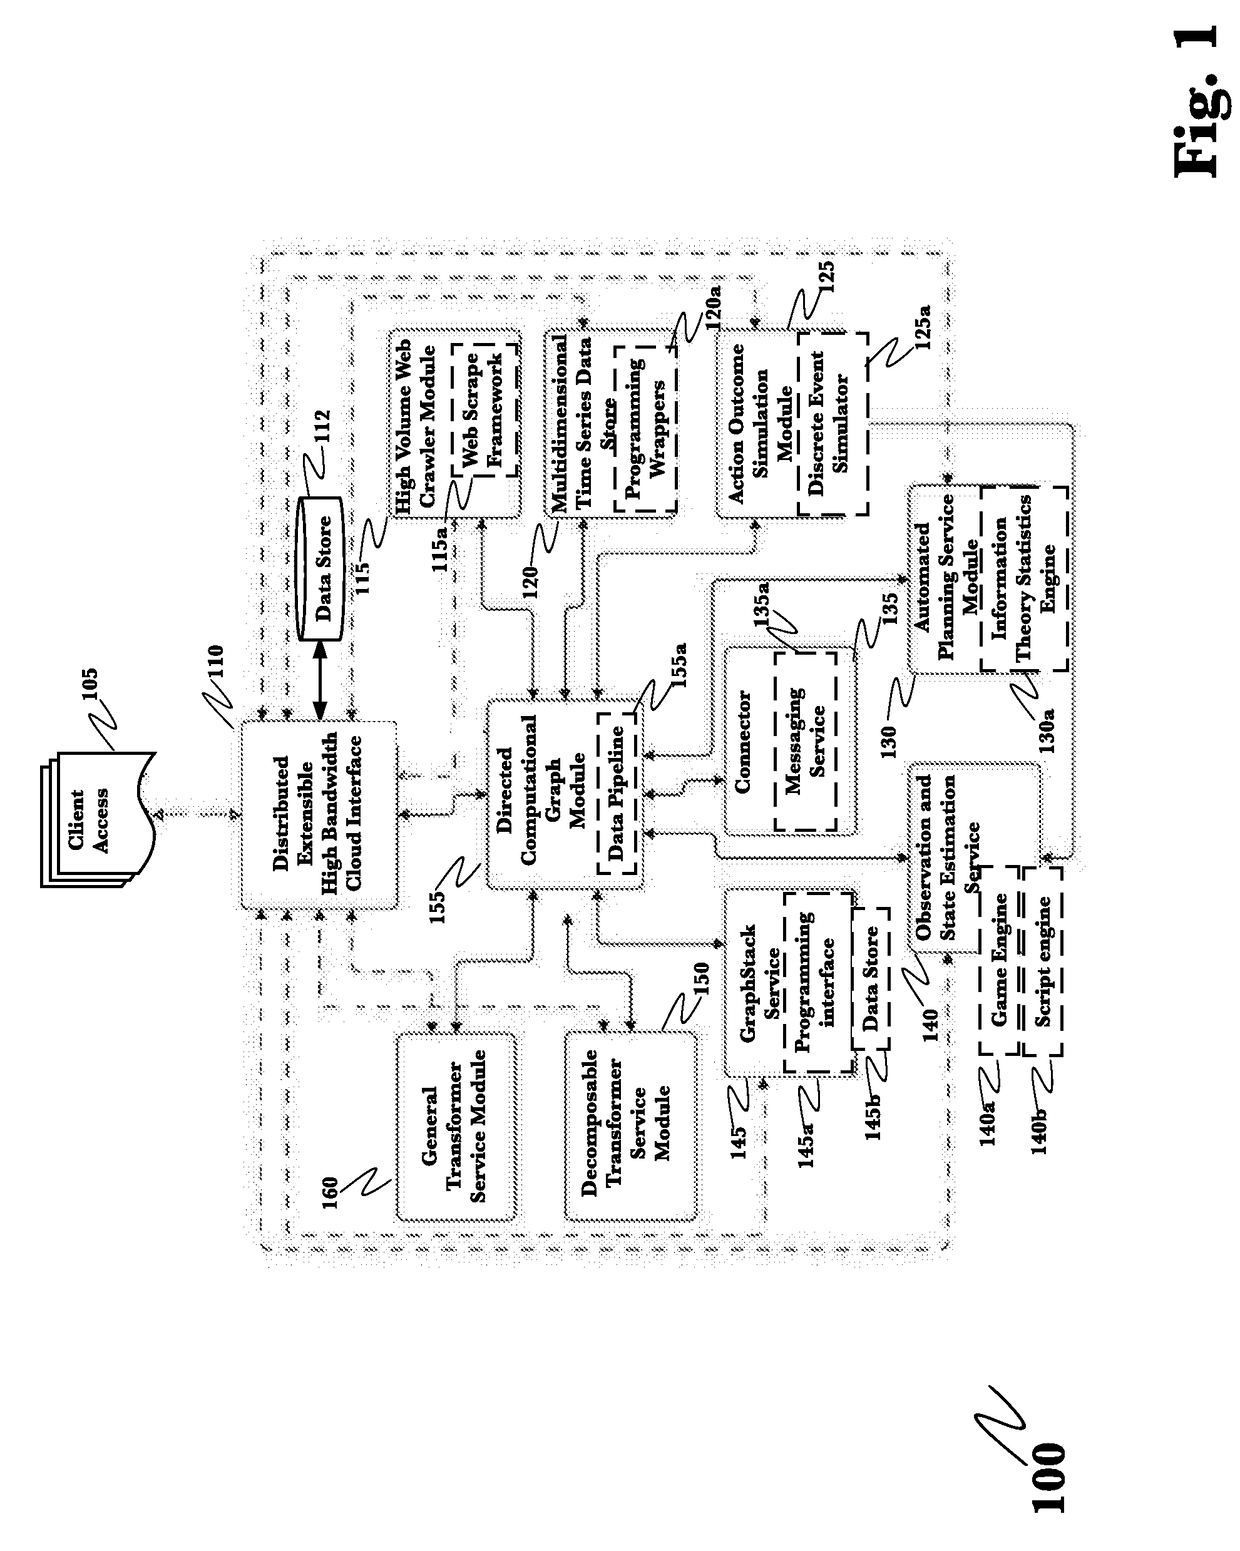 System for automated capture and analysis of business information for reliable business venture outcome prediction